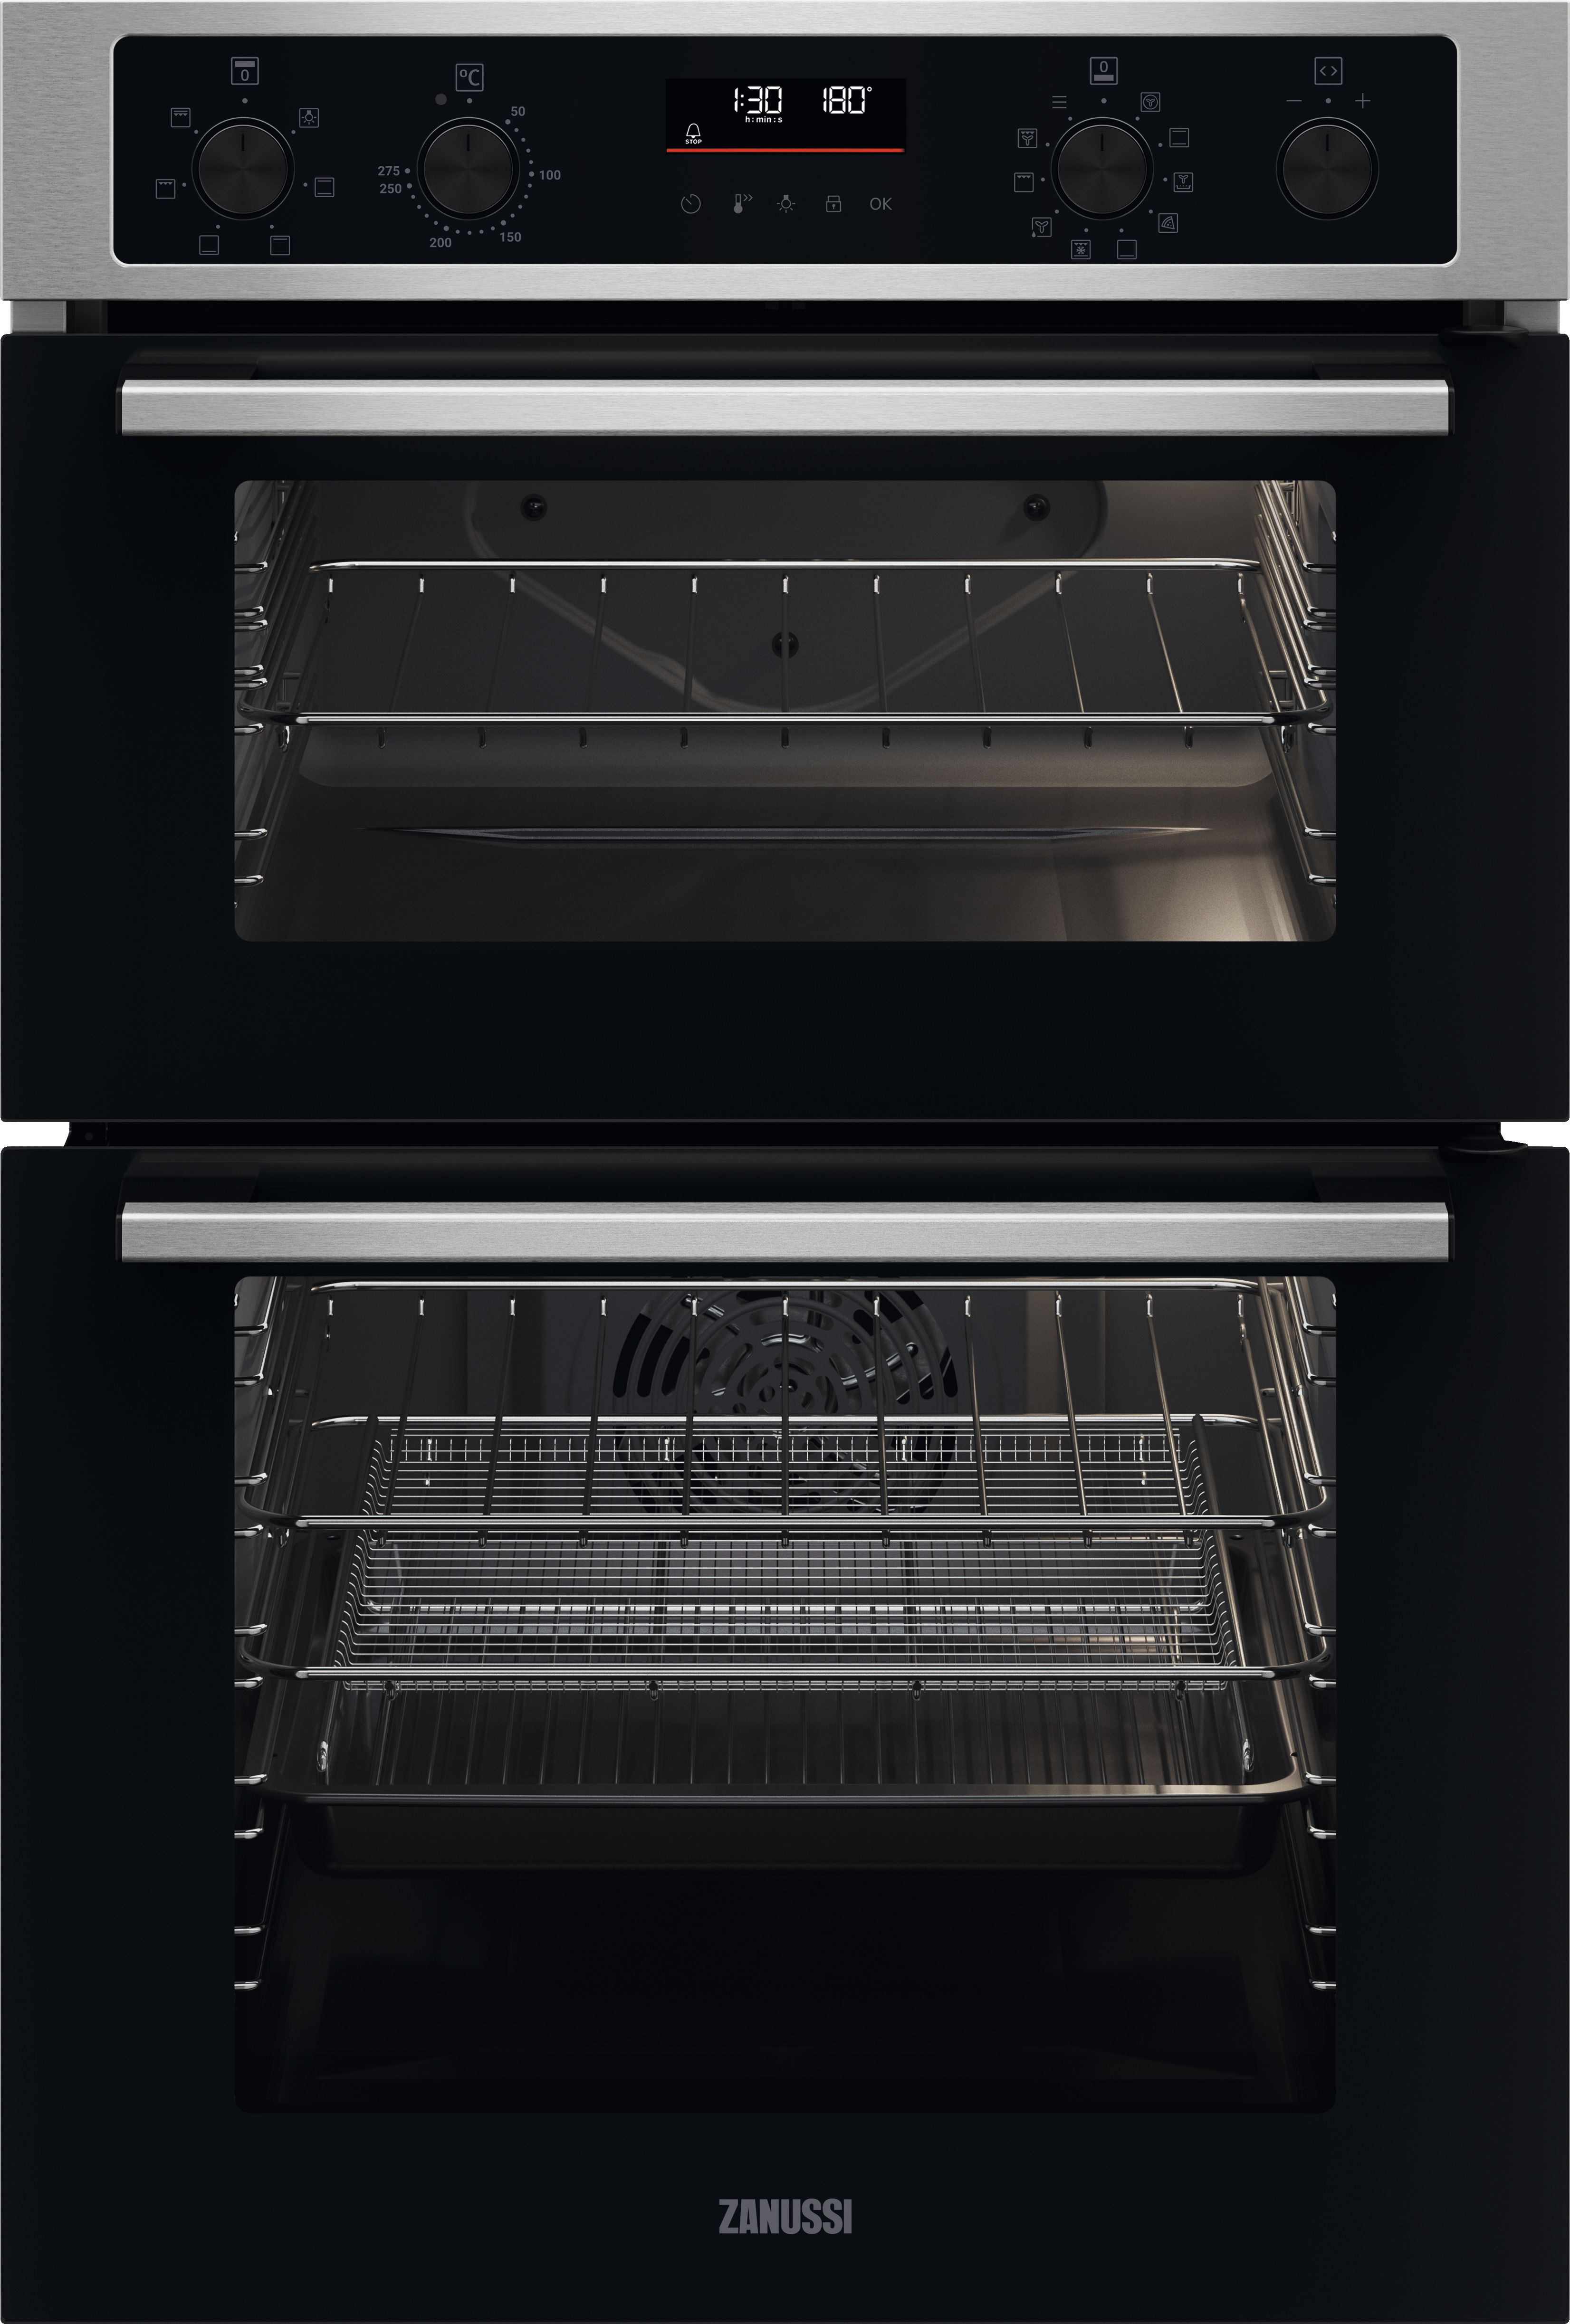 Zanussi Series 40 AirFry ZKCNA7XN Built In Electric Double Oven - Black / Stainless Steel - A Rated, Black